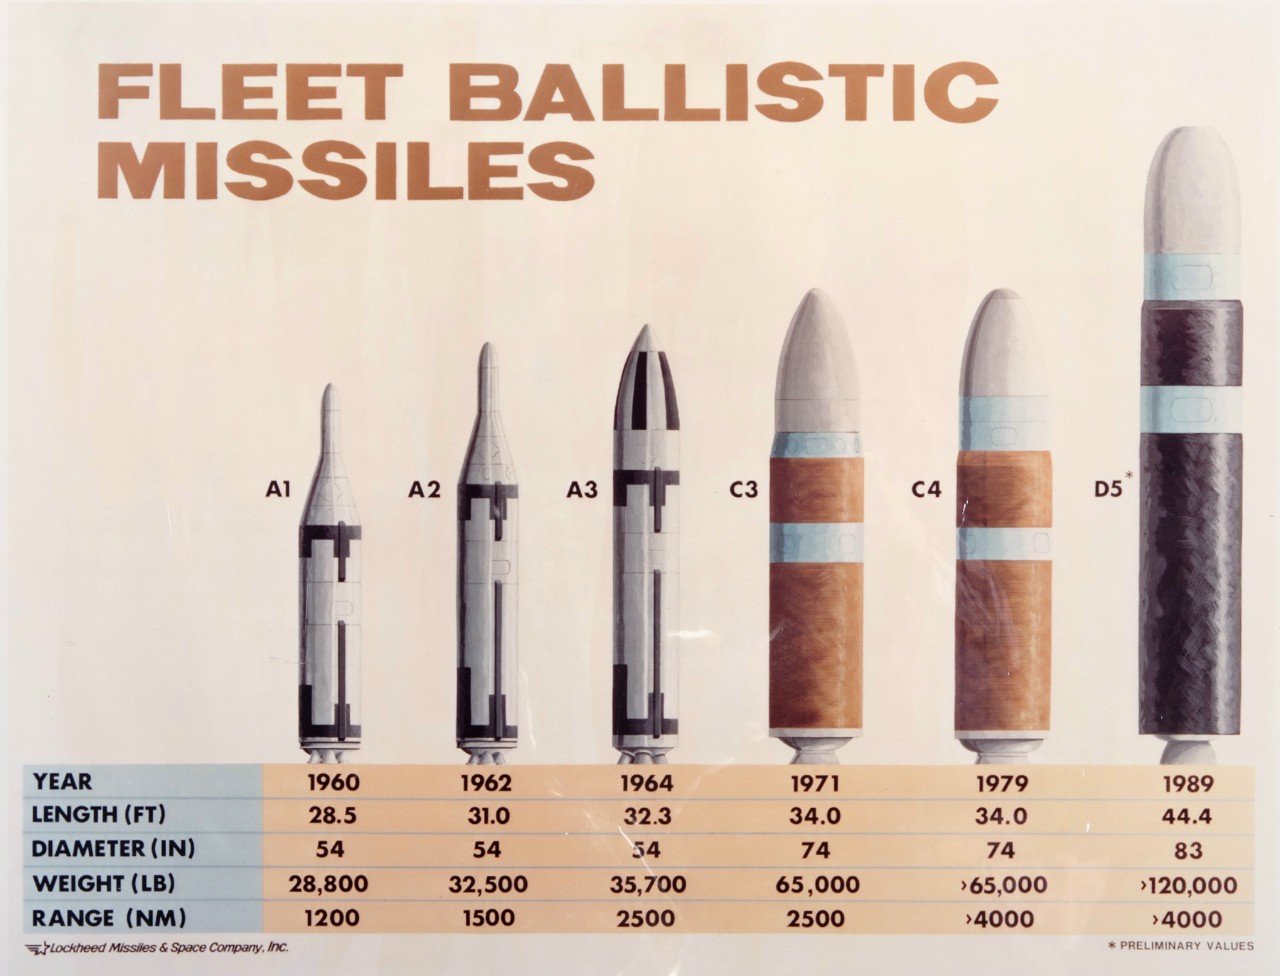 Poster with images of Fleet Ballistic Missiles: A1, Year 1960, Length 28.5 feet, Diameter 54 inches, Weight 28,800 pounds, Range 1200 nautical miles. A2, Year 1962, Length 31.0 feet, Diameter 54 inches, Weight 32,500 pounds, Range 1500 nautical miles. A3, Year 1964, Length 32.3 feet, Diameter 54 inches, Weight 35,700 pounds, Range 2500 nautical miles. C3, Year 1971, Length 34.0 feet, Diameter 74 inches, Weight 65,000 pounds, Range 2500 nautical miles. C4, Year 1979, Length 34.0 feet, Diameter 74 inches, Weight 65,000 pounds, Range 4000 nautical miles. D5, Year 1989, Length 44.4 feet, Diameter 83 inches, Weight 120,000 pounds, Range 4000 nautical miles.